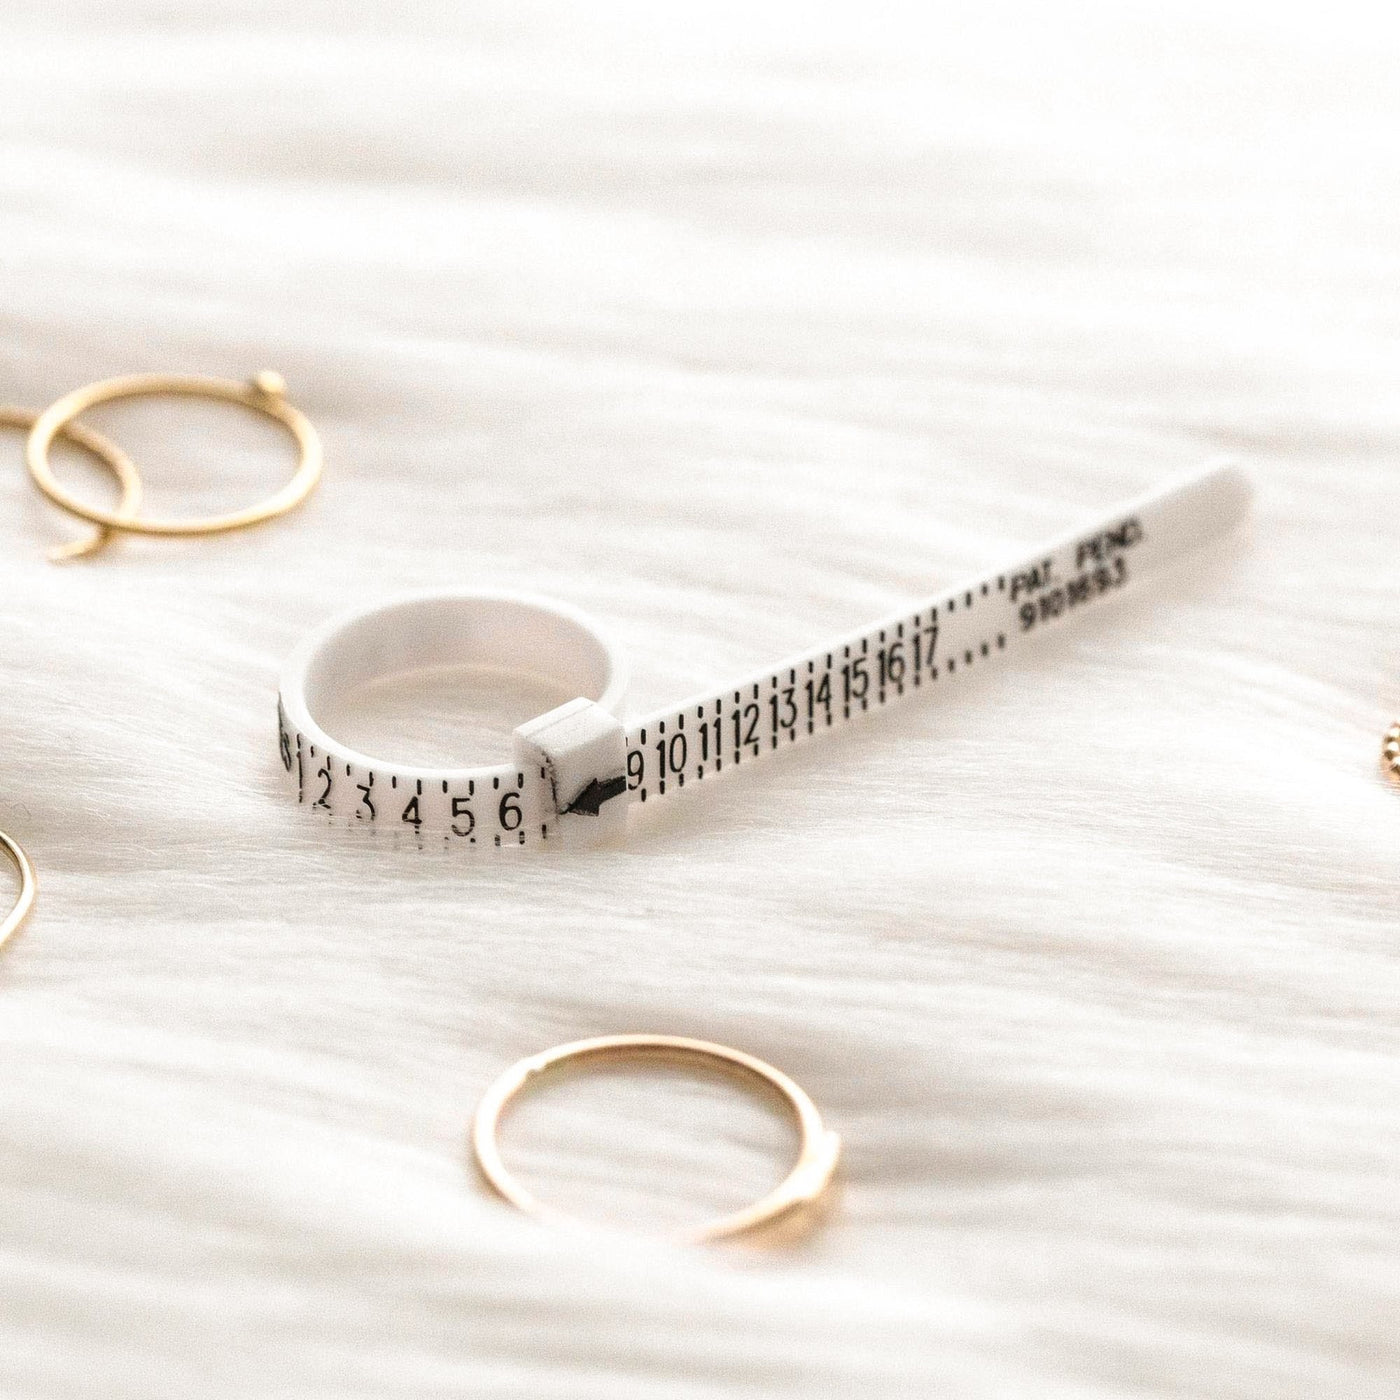 FREE Ring Sizer by Simple & Dainty Jewelry